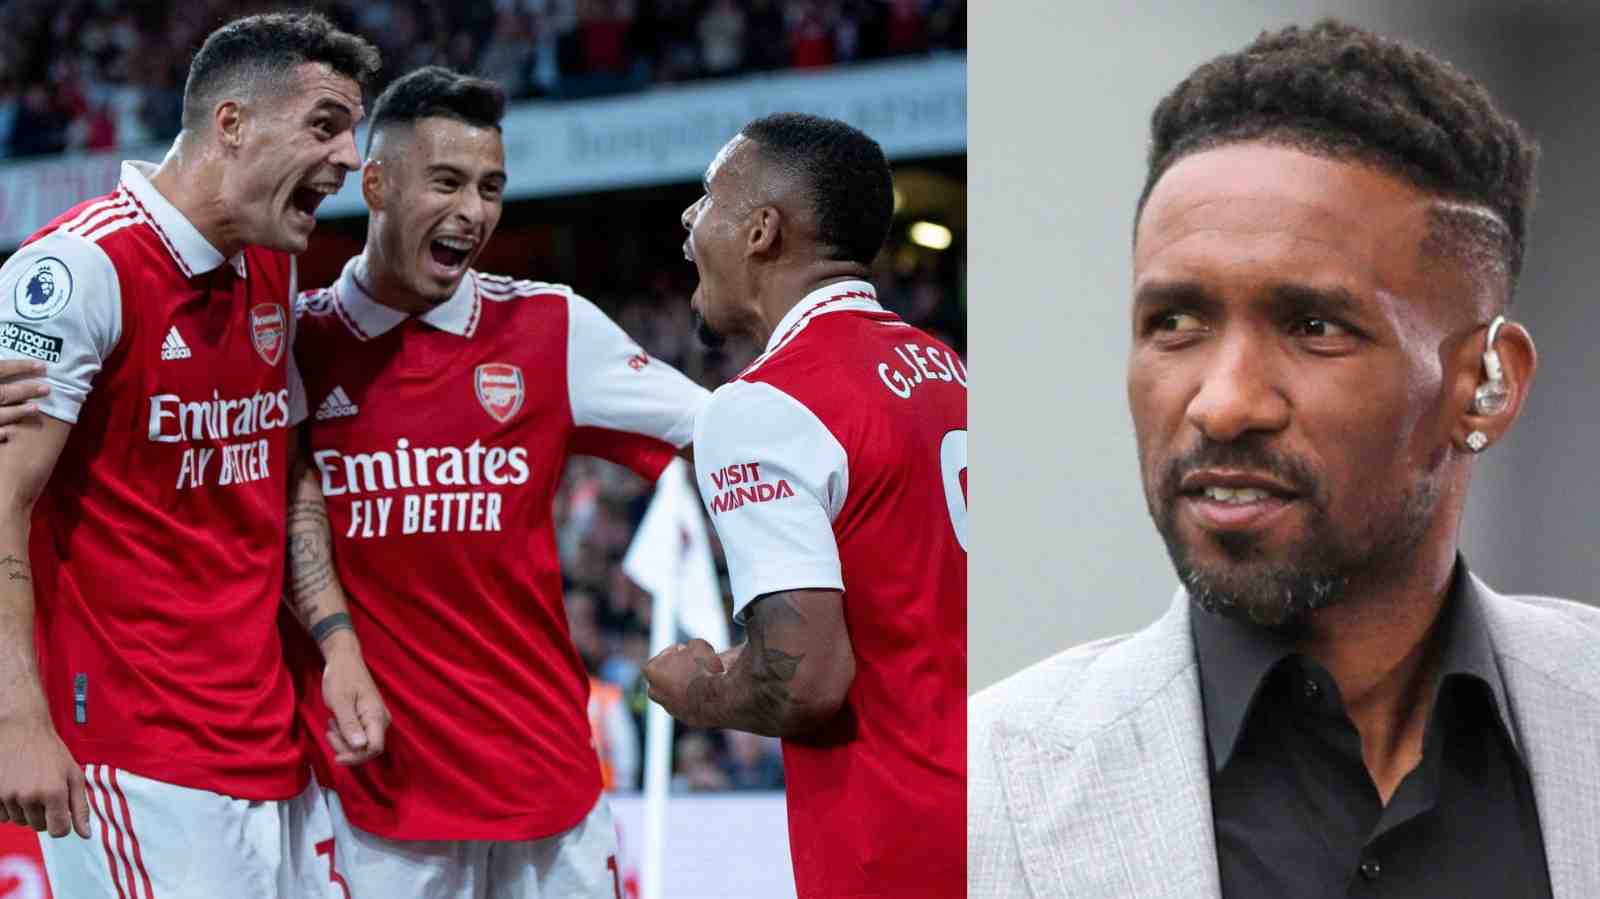 'In my books, they are not a top four team': Ex Spurs player Jermaine Defoe insists Arsenal are not a top four side